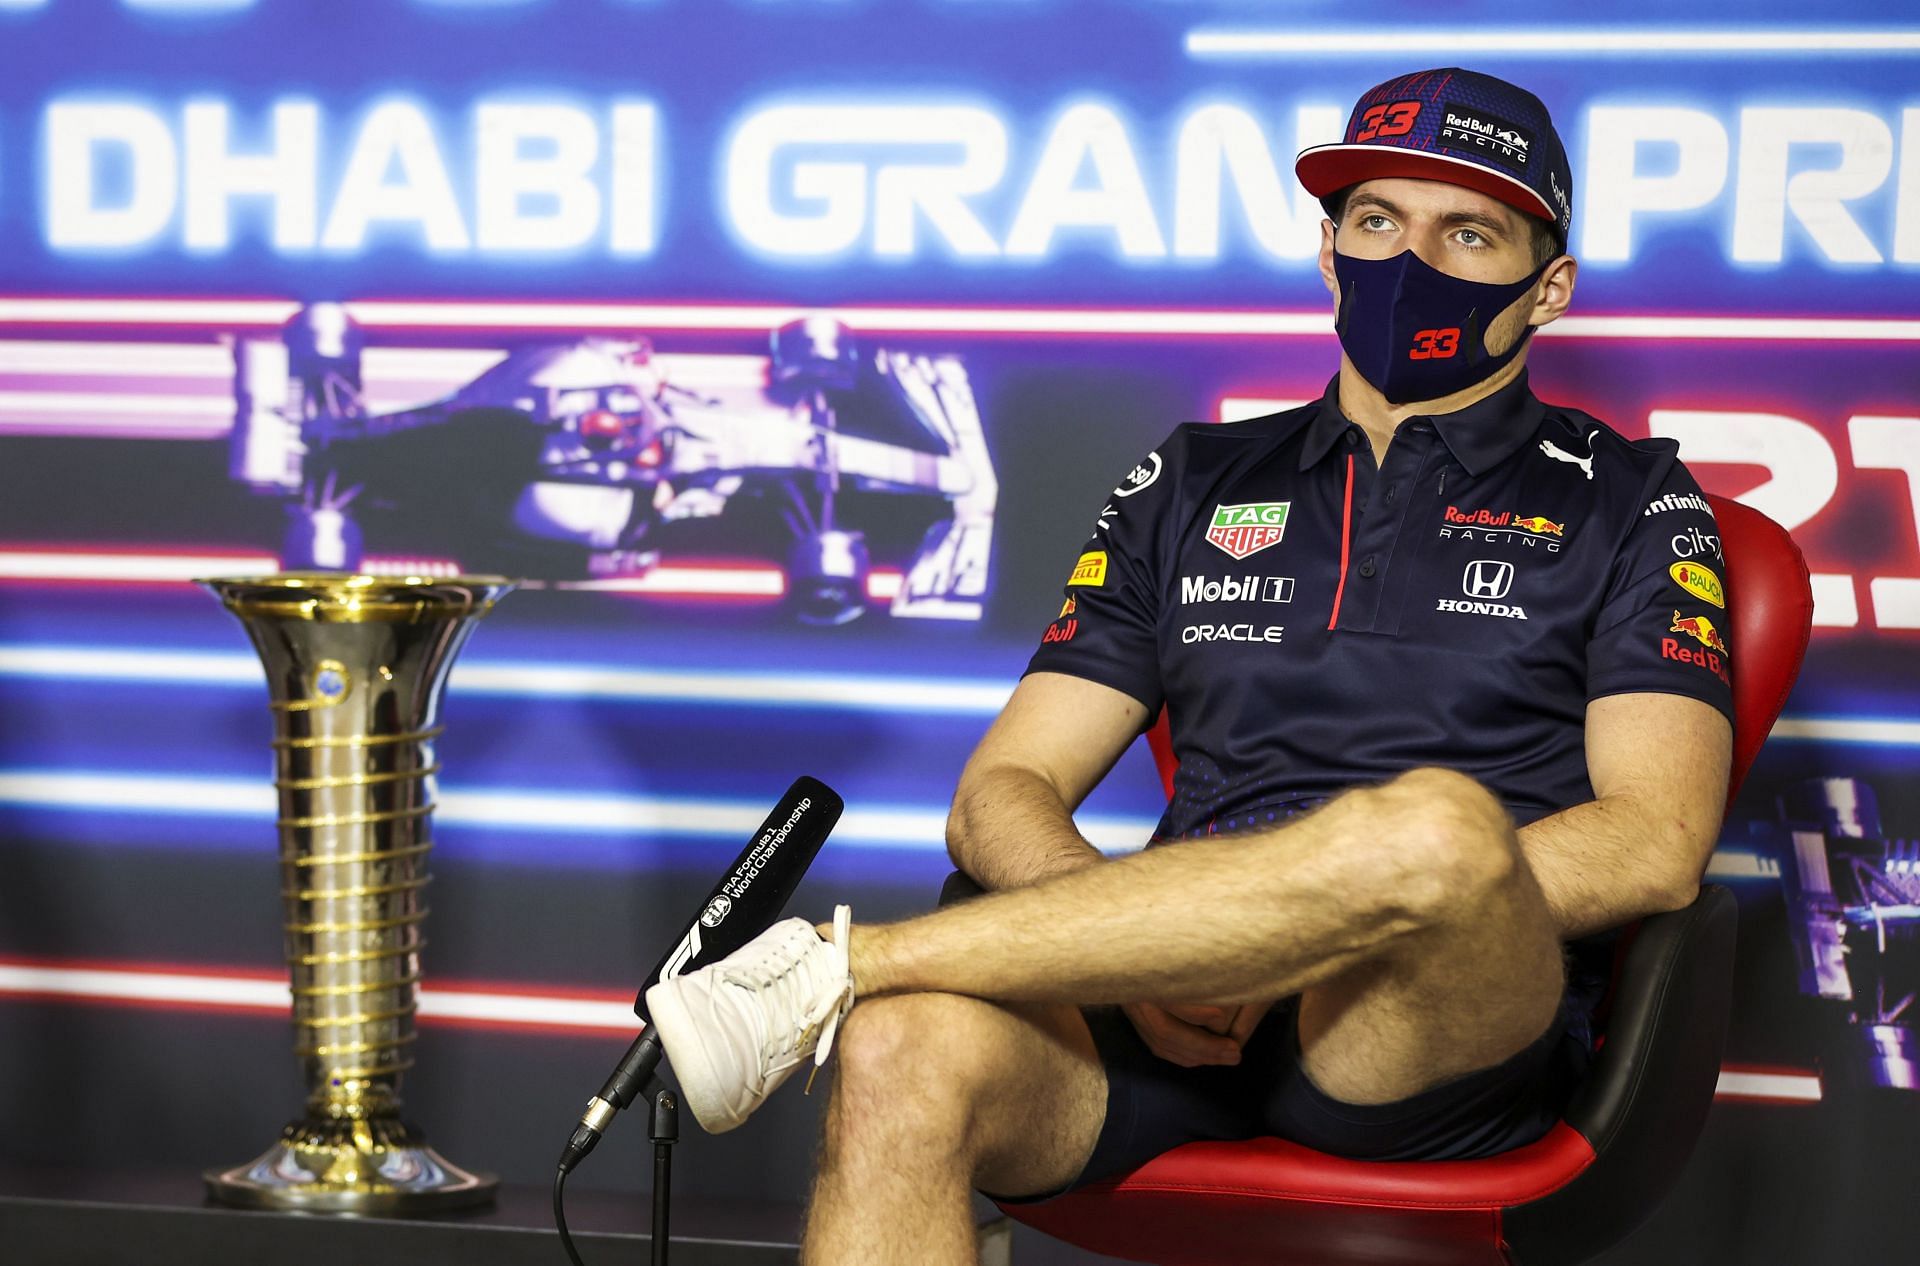 Max Verstappen speaks to the press ahead of the Abu Dhabi GP. Image courtesy: Antonin Vincent - Pool/Getty Images